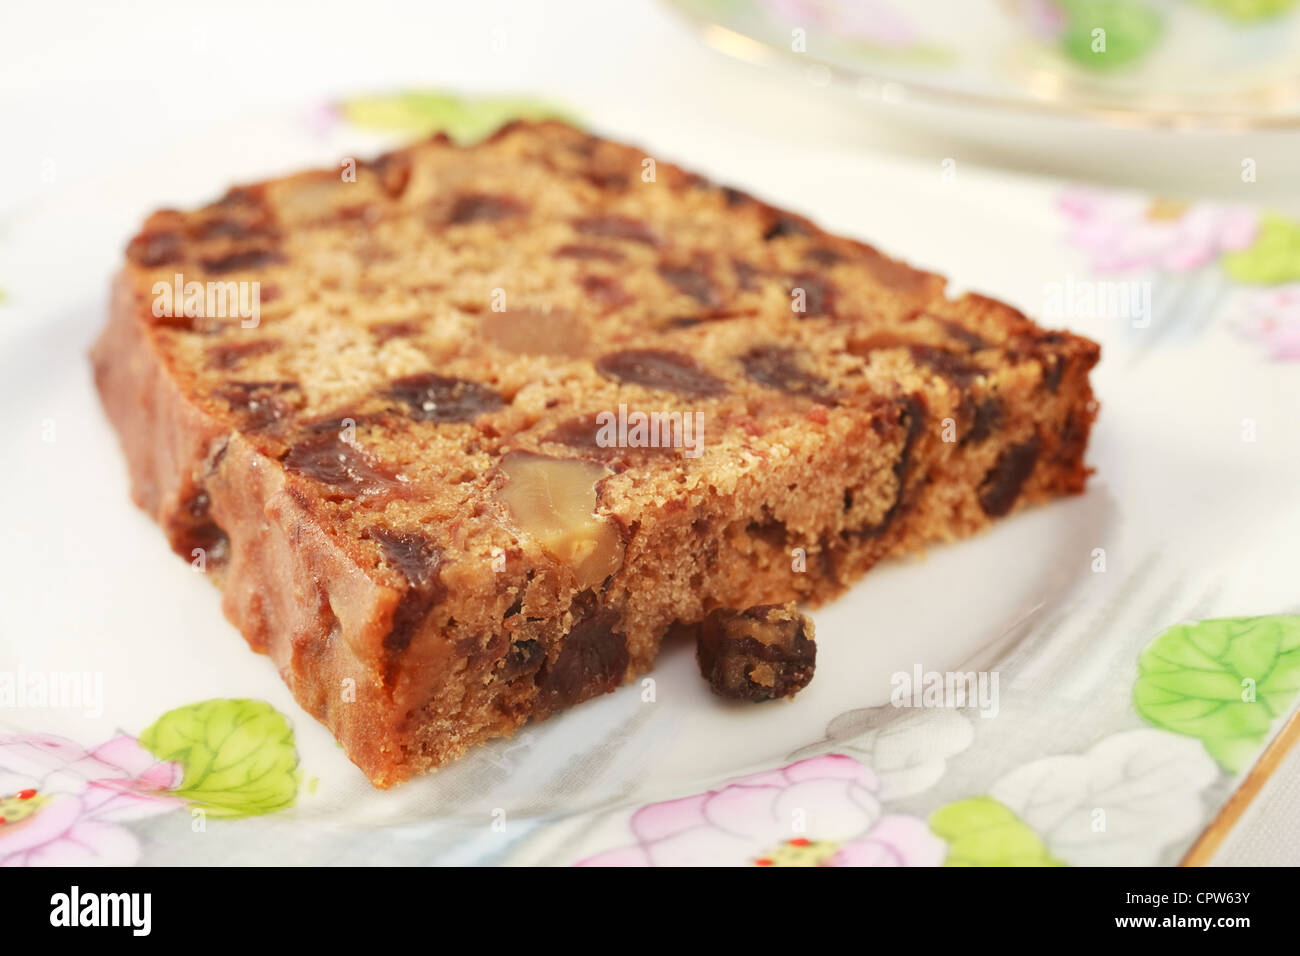 A fruit cake with walnuts which contains no fat, known as Irish Tea Bread. On pretty floral crockery for afternoon tea. Stock Photo